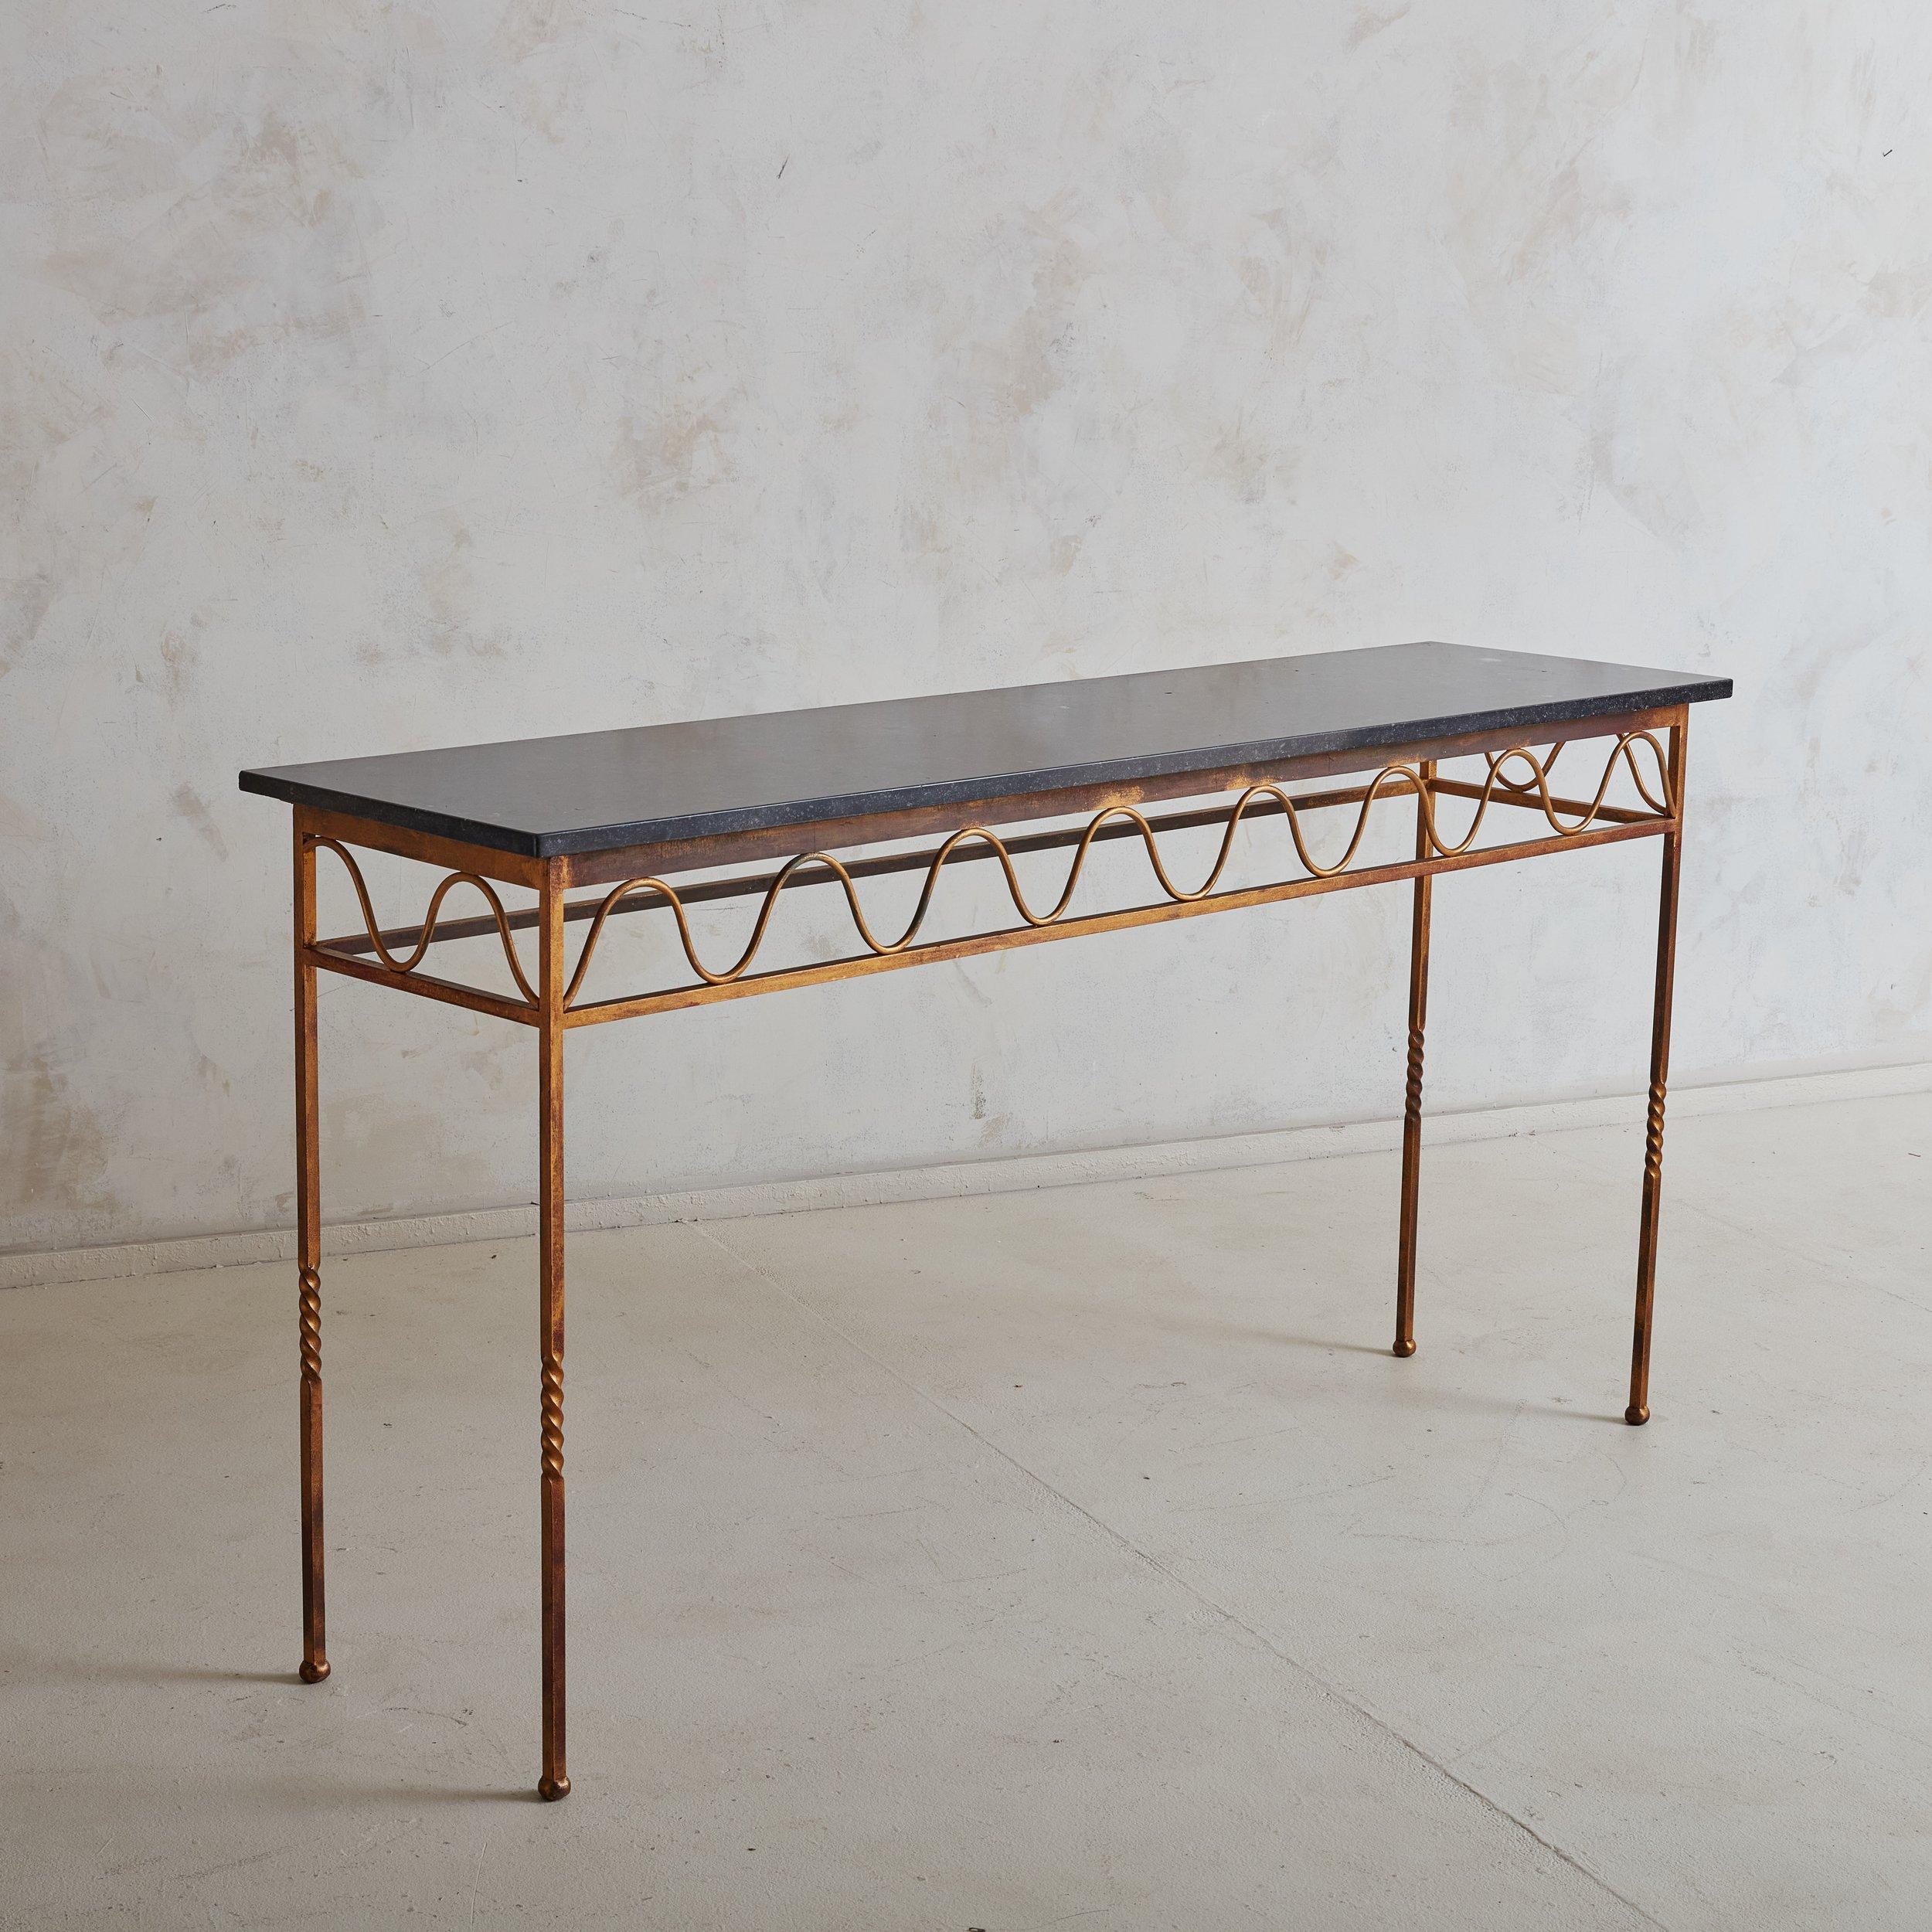 Neoclassical Gilt Iron Squiggle Console Table with Black Marble Top, 1940s For Sale